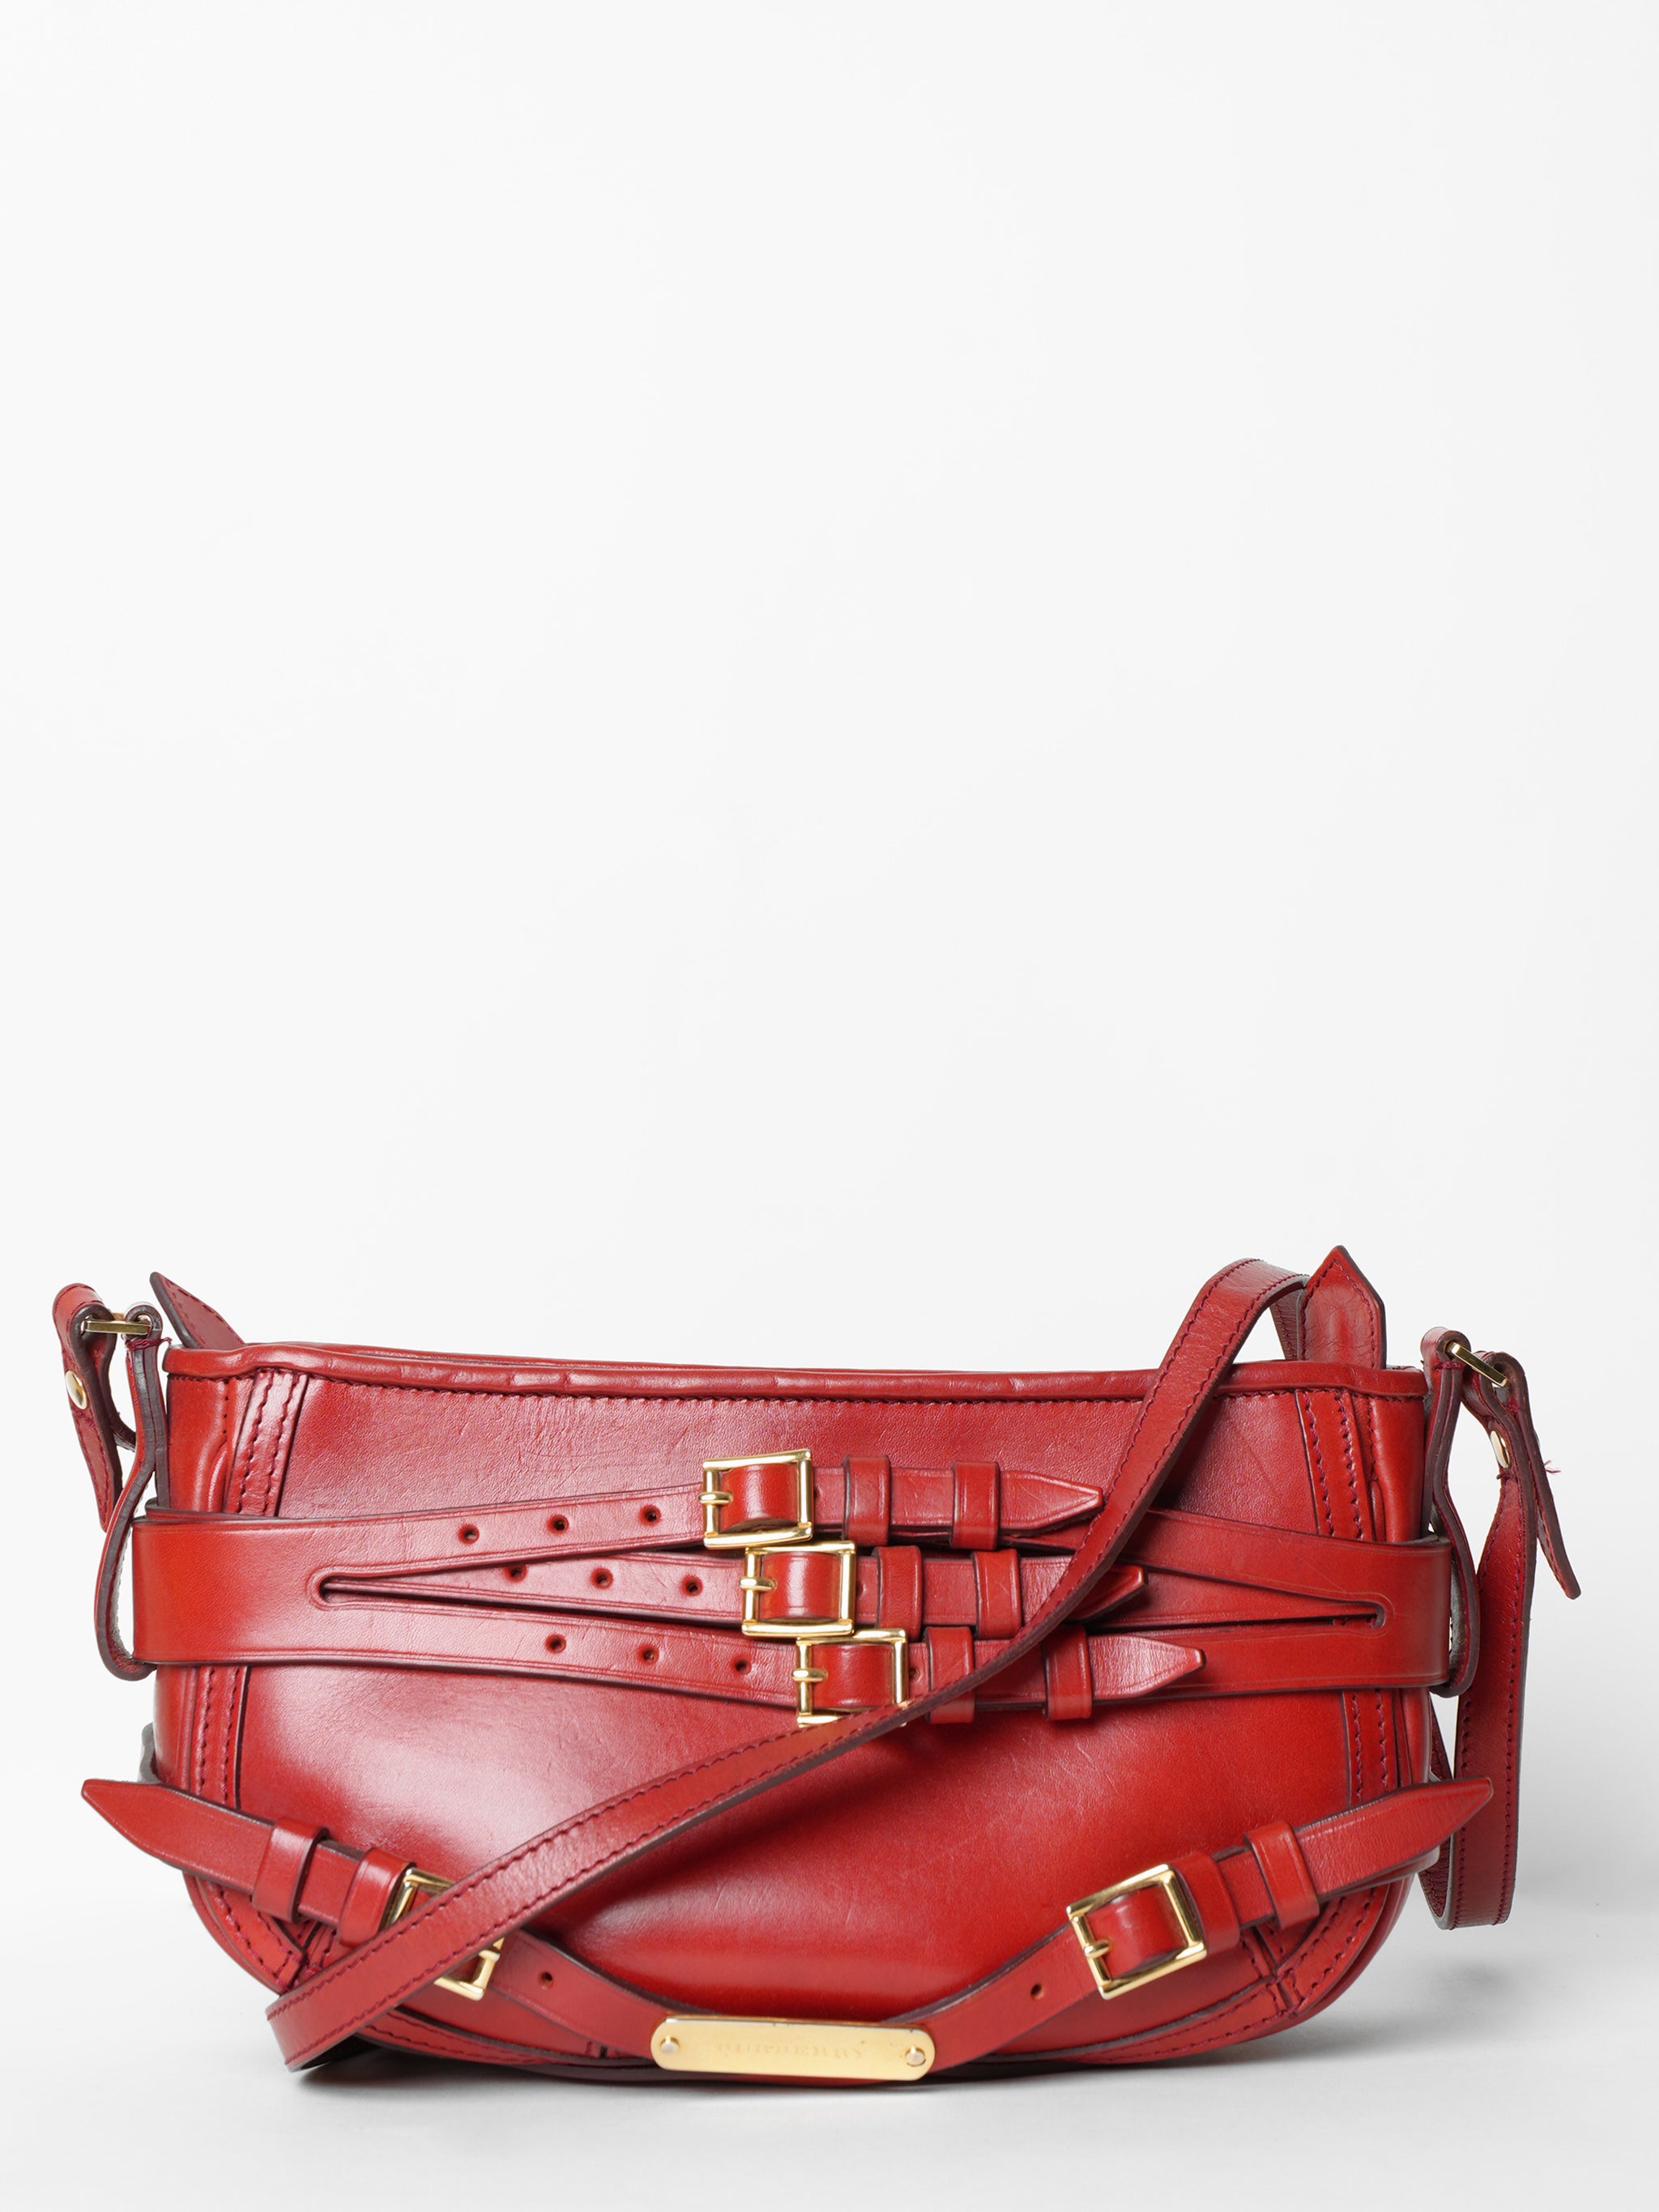 Burberry Red belted Bag